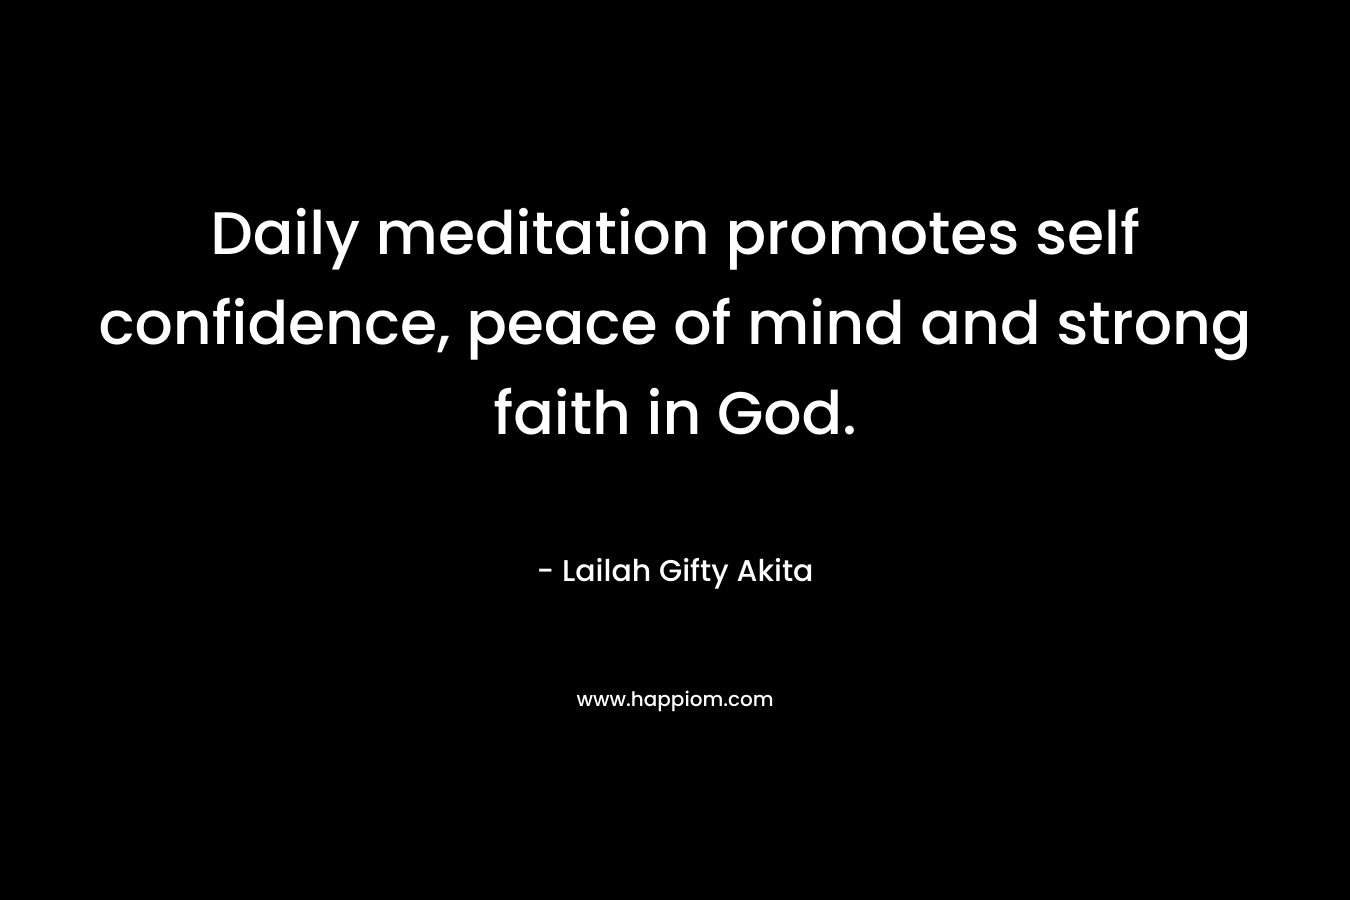 Daily meditation promotes self confidence, peace of mind and strong faith in God.